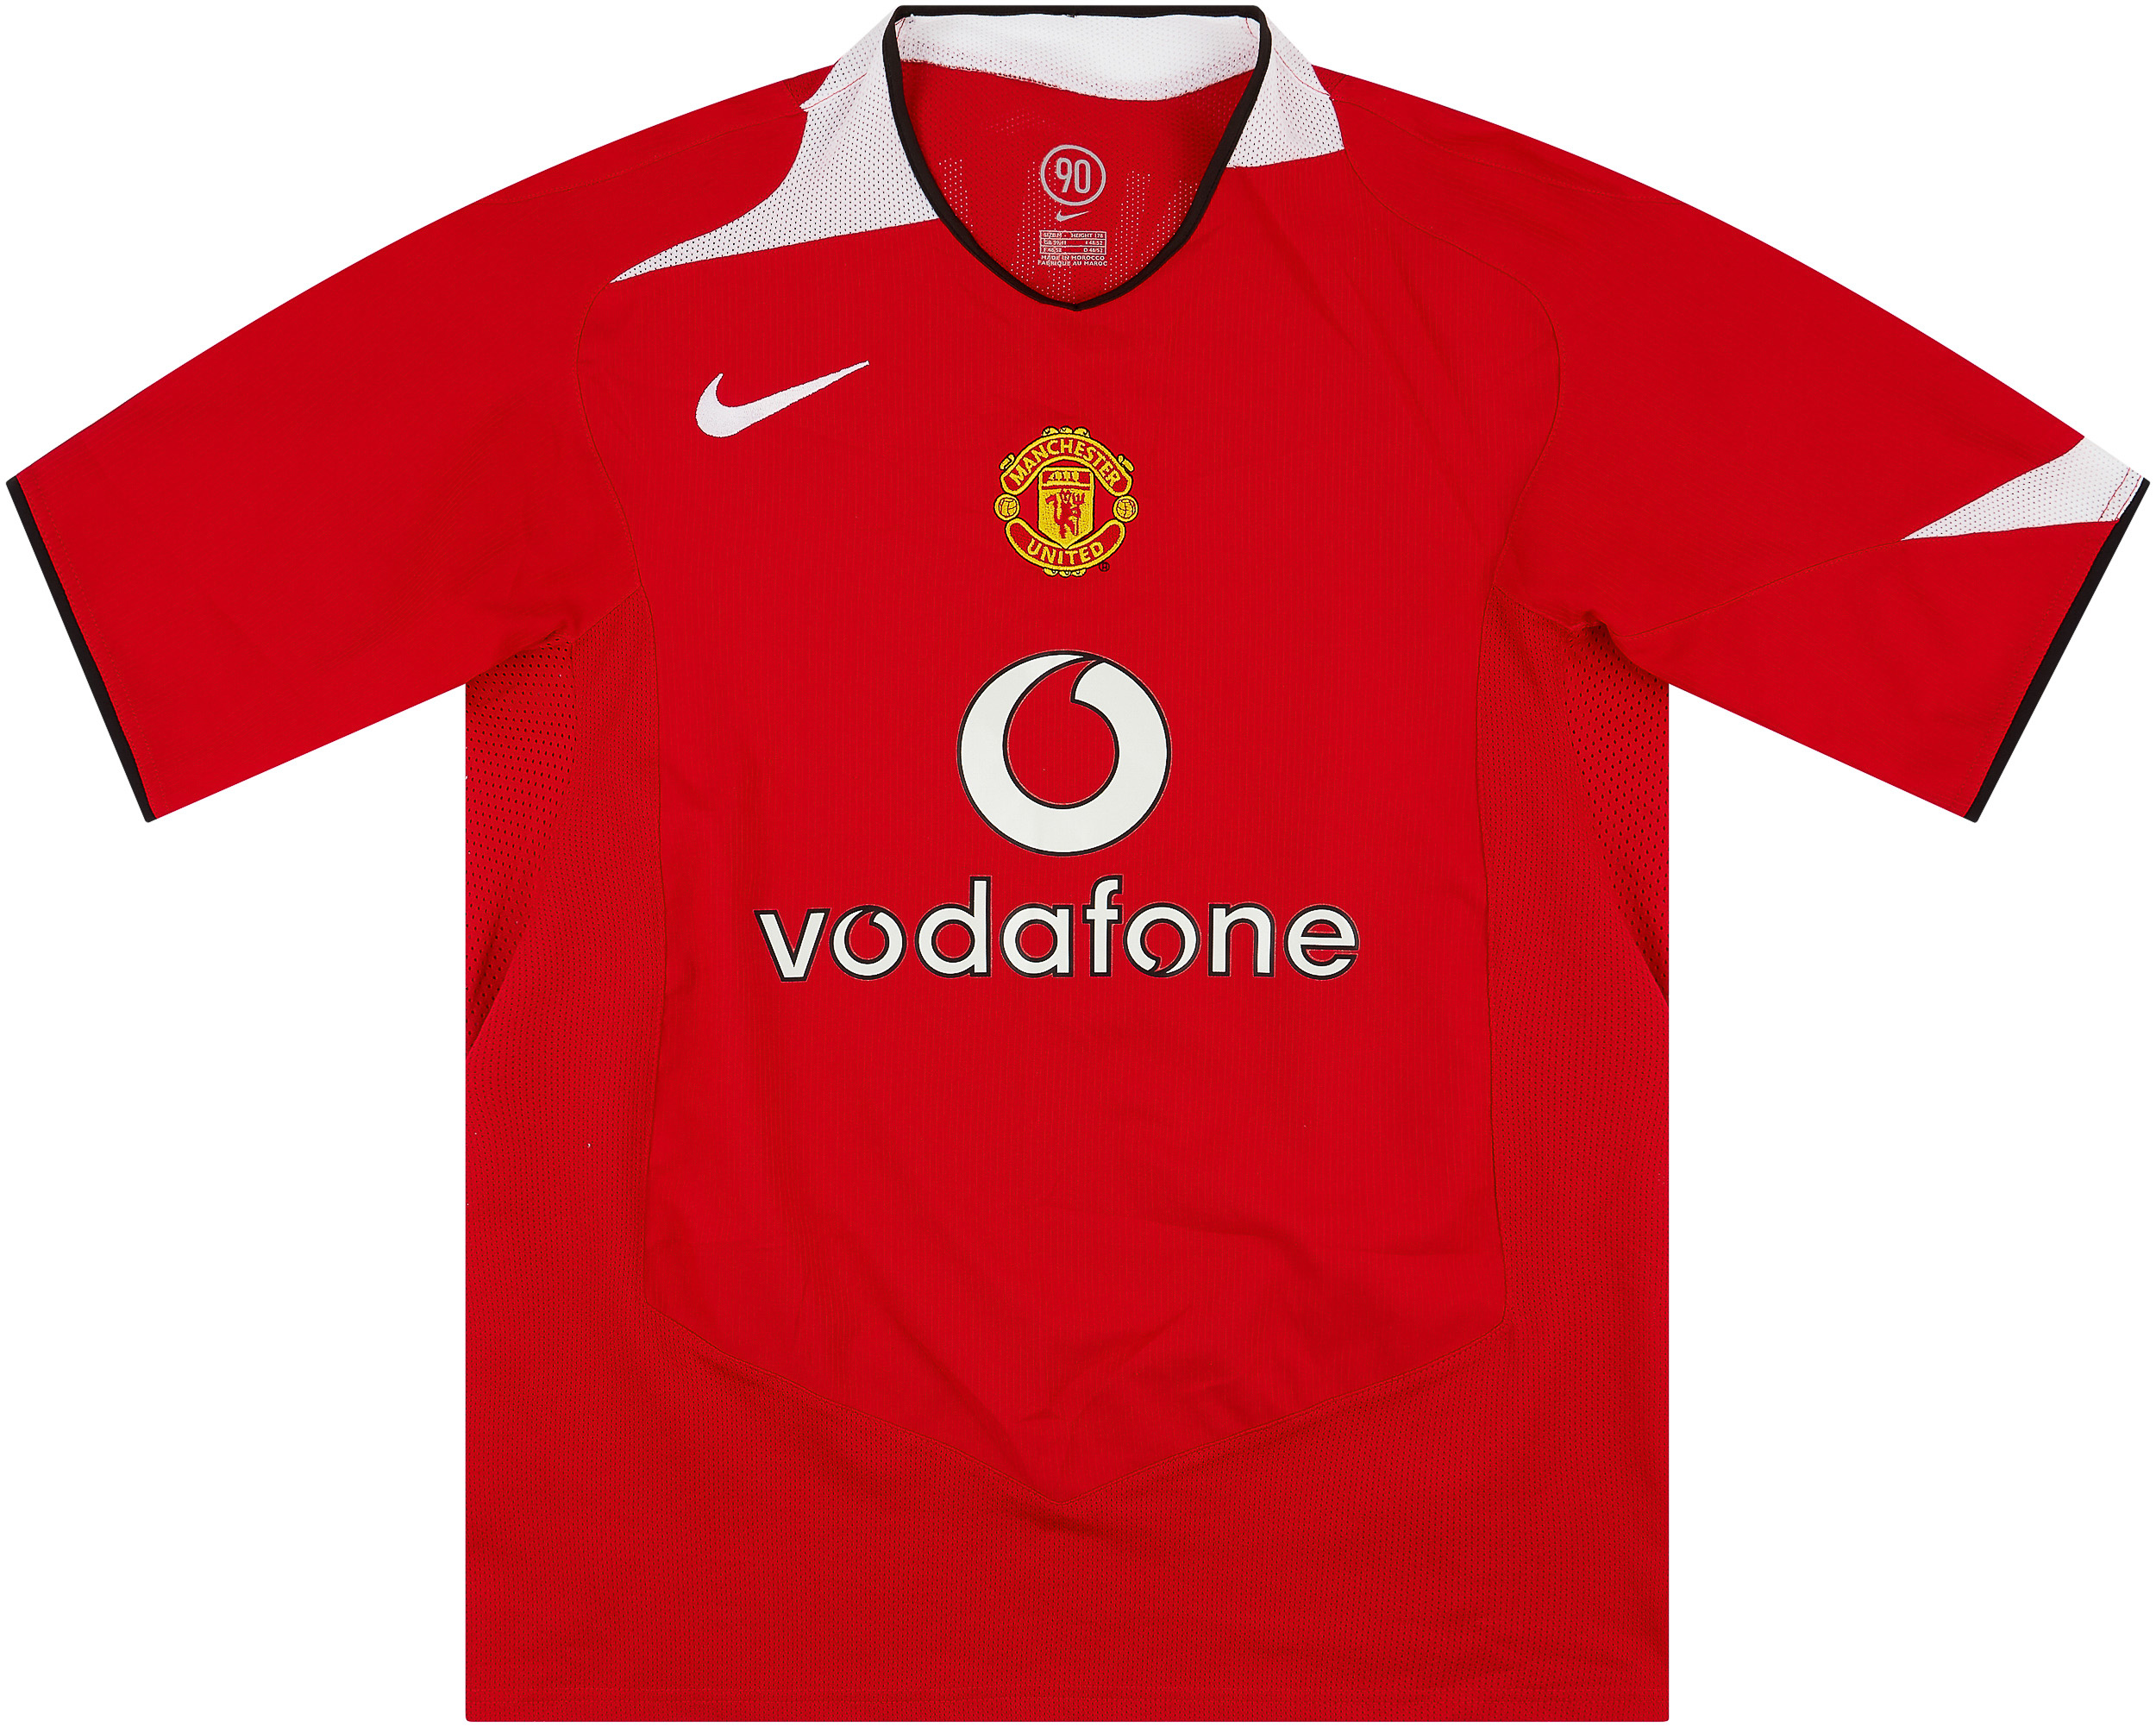 2004-06 Manchester United Home Shirt - 7/10 - ()